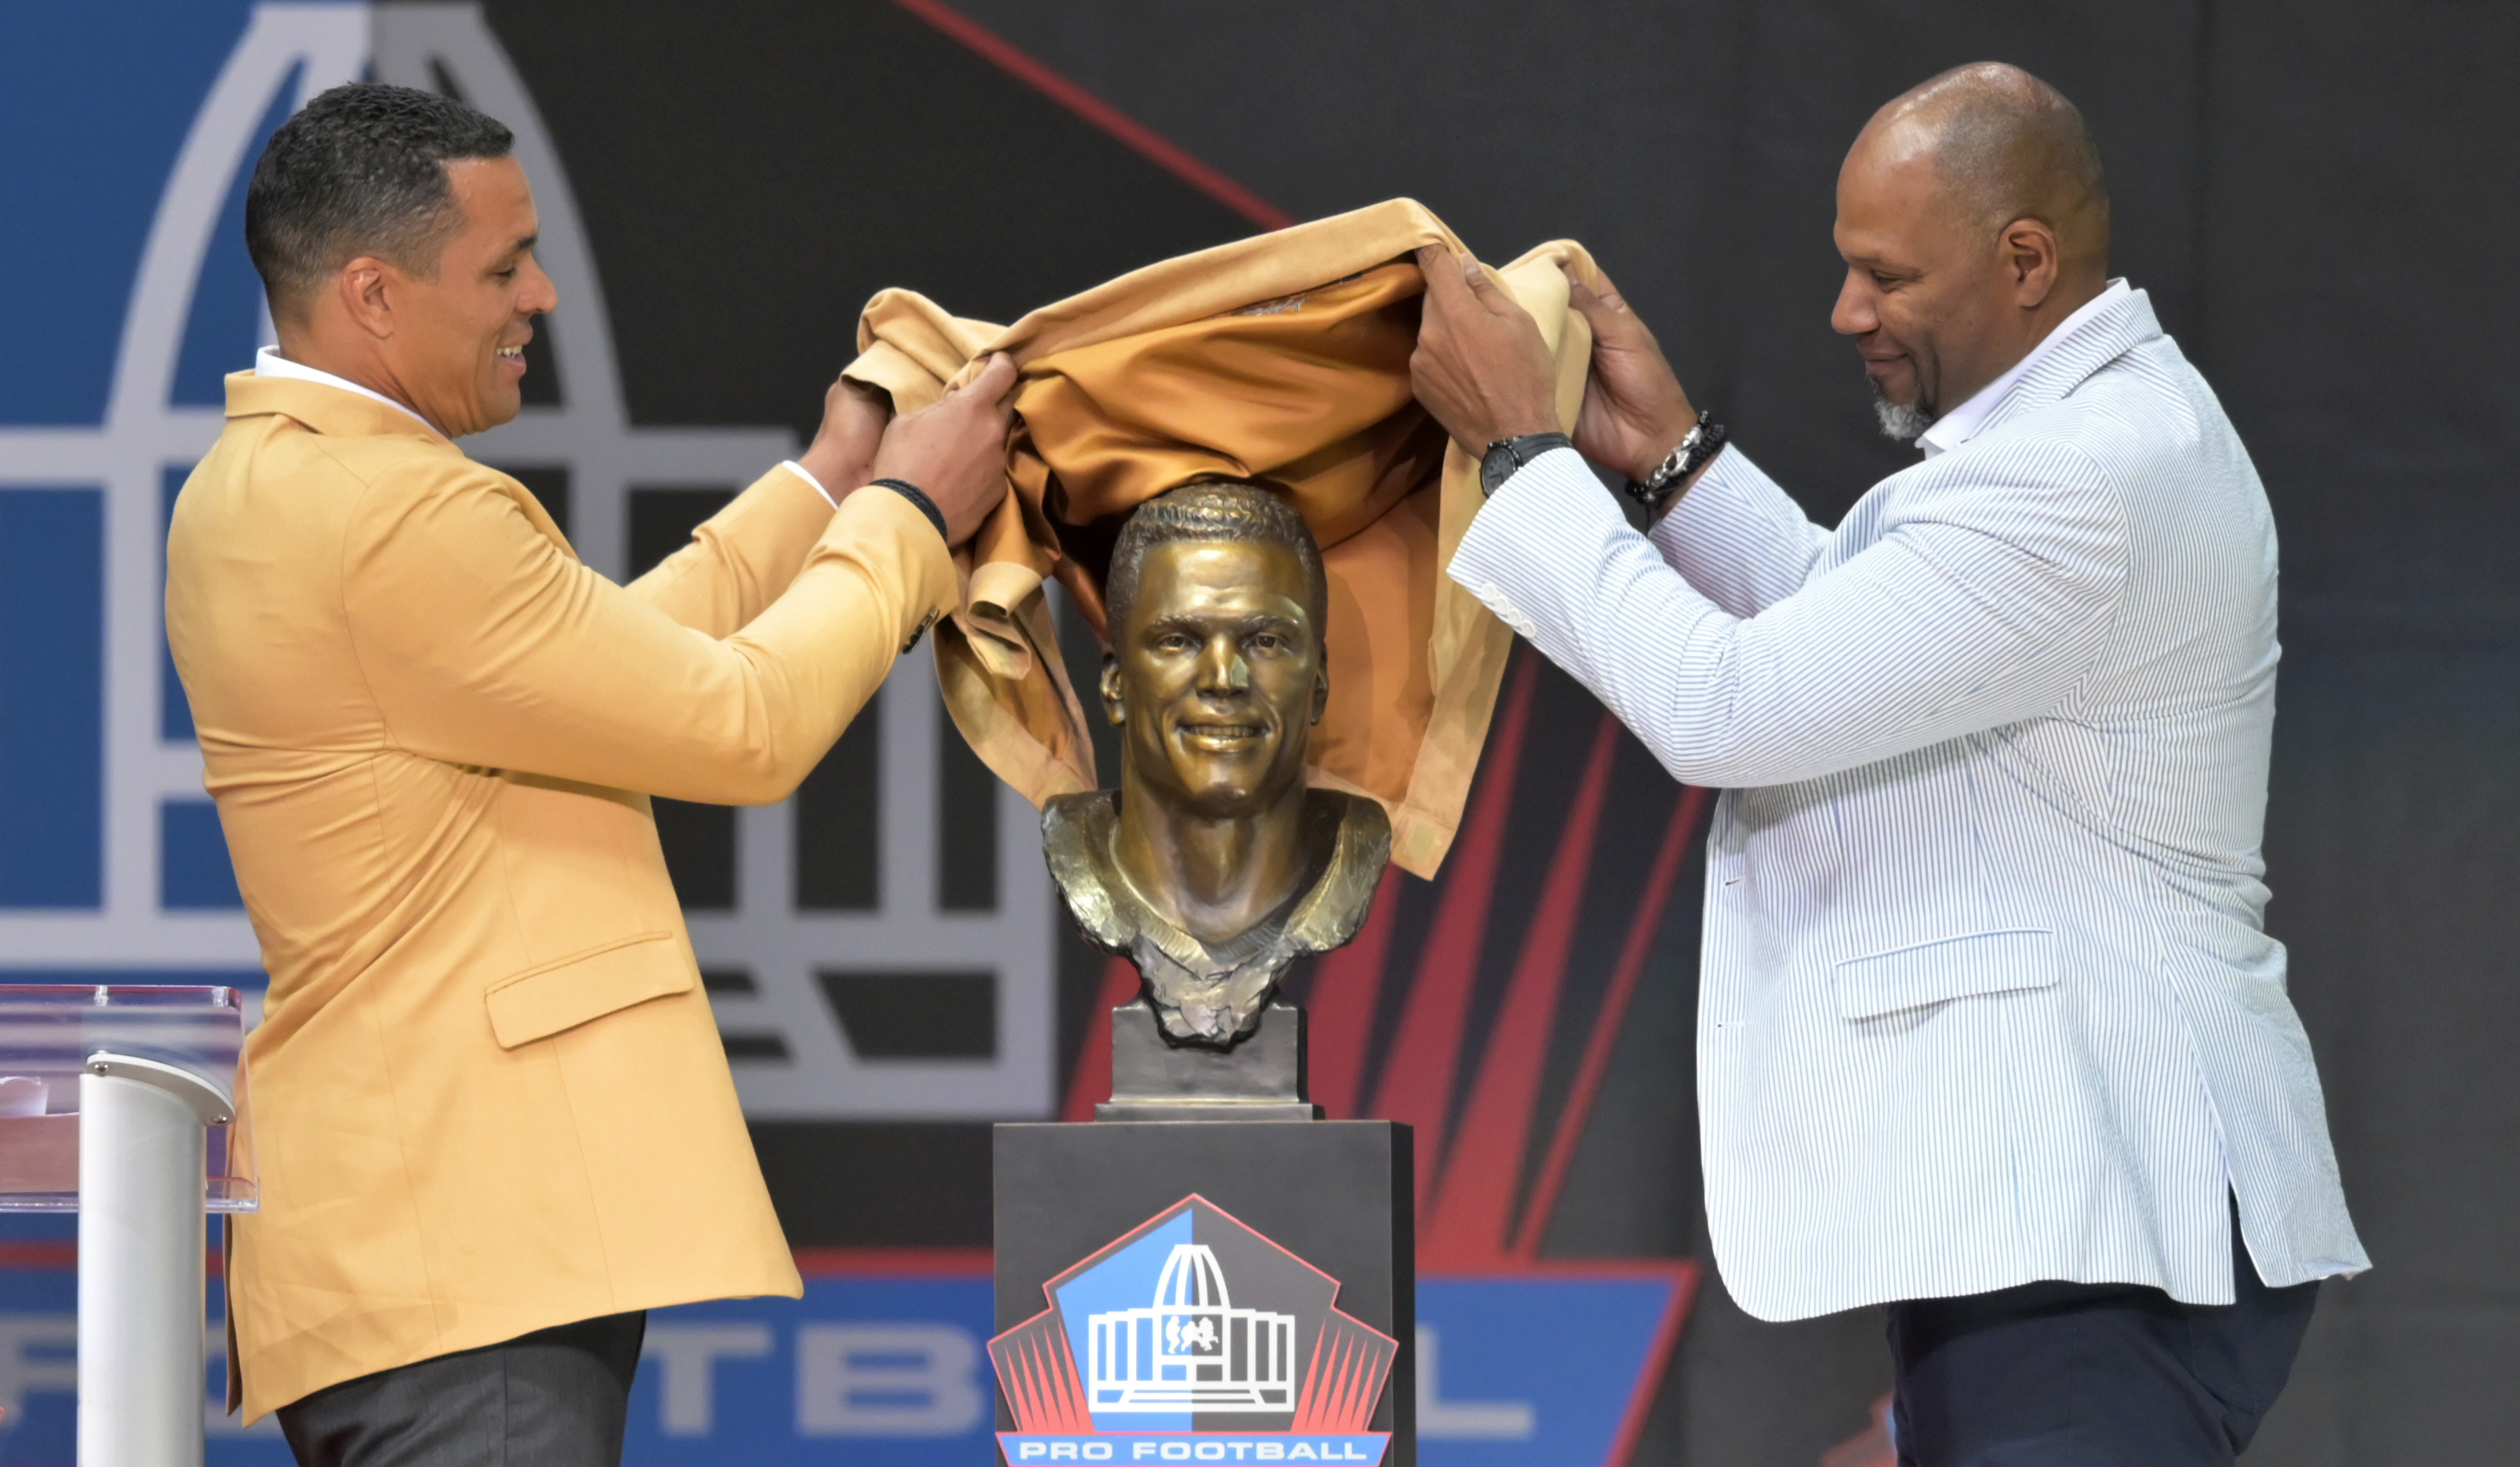 class of 2022 hall of fame nfl